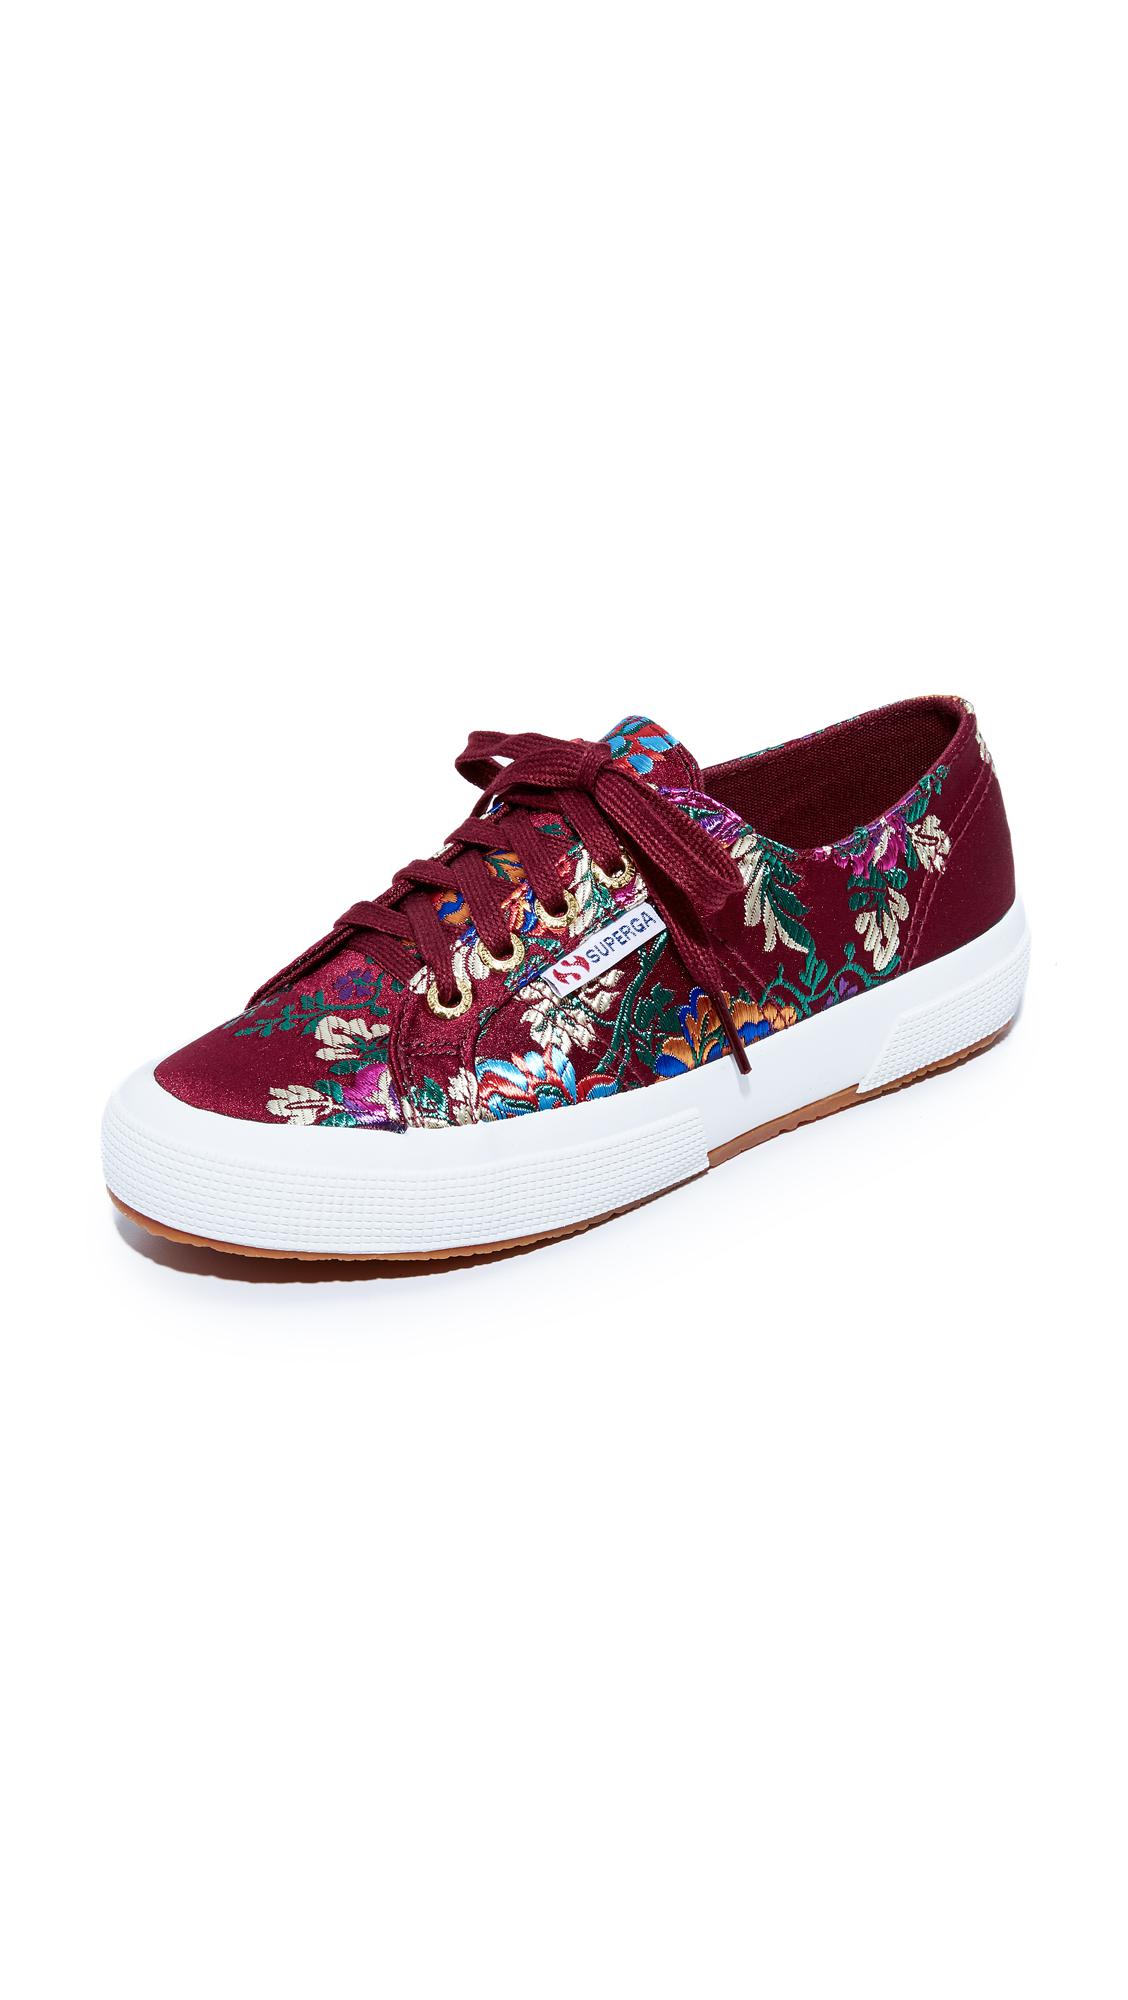 Superga 2750 Mandarin Embroidery Sneakers in Red | Lyst